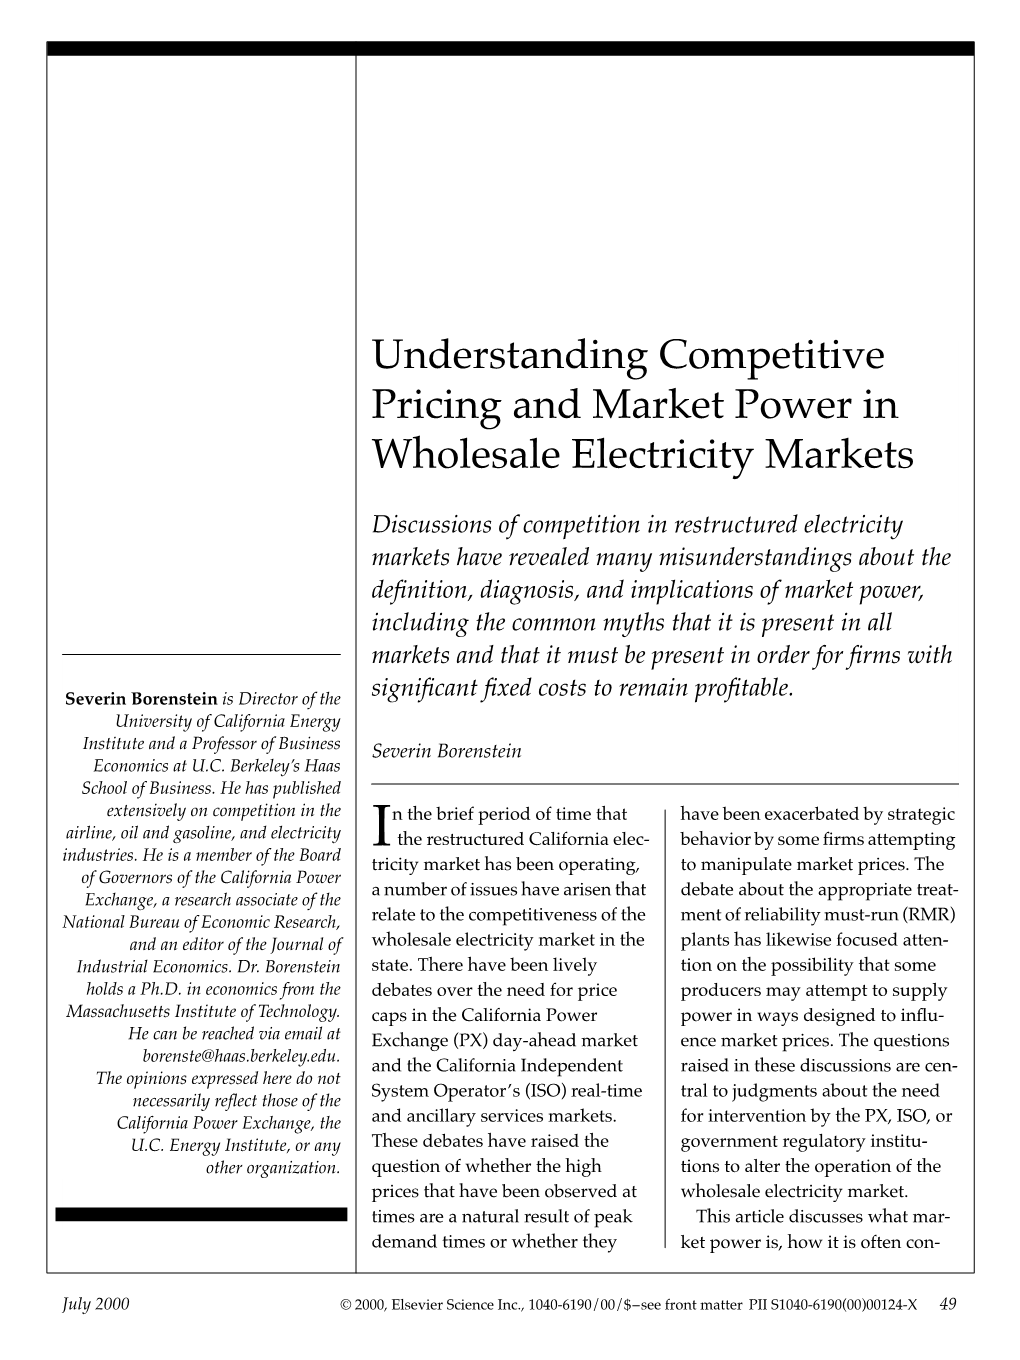 Understanding Competitive Pricing and Market Power in Wholesale Electricity Markets